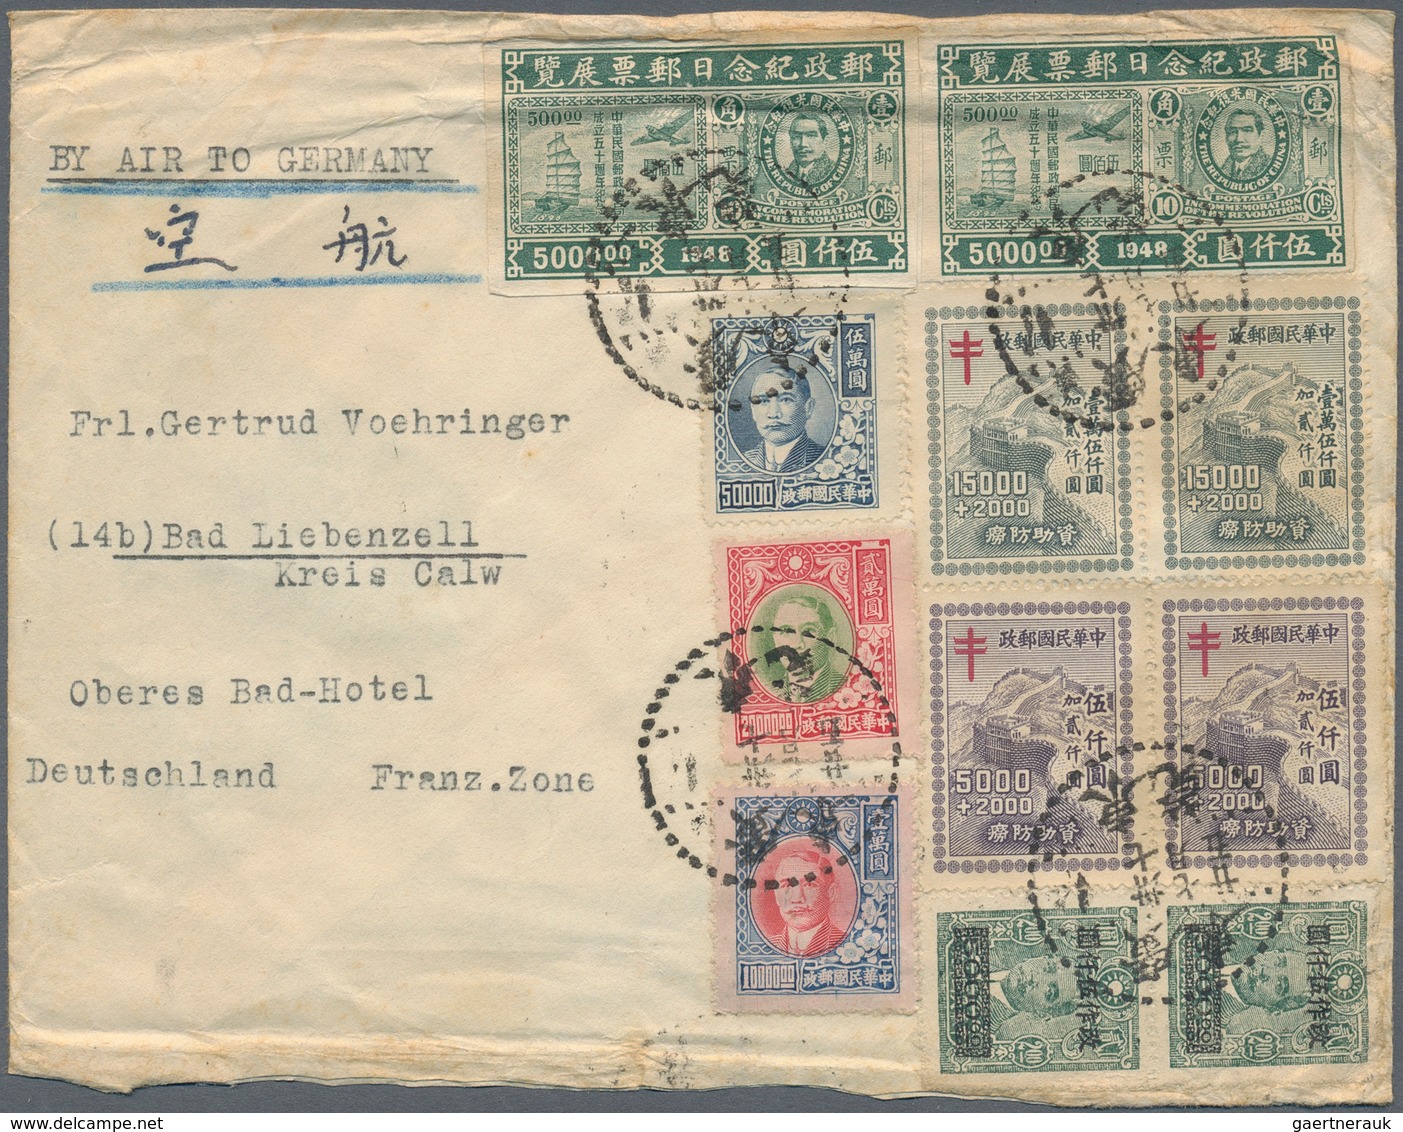 China: 1908/81, covers/used ppc (20) inc. coiling dragon ppc, year of the cock booklet SB2 on regist